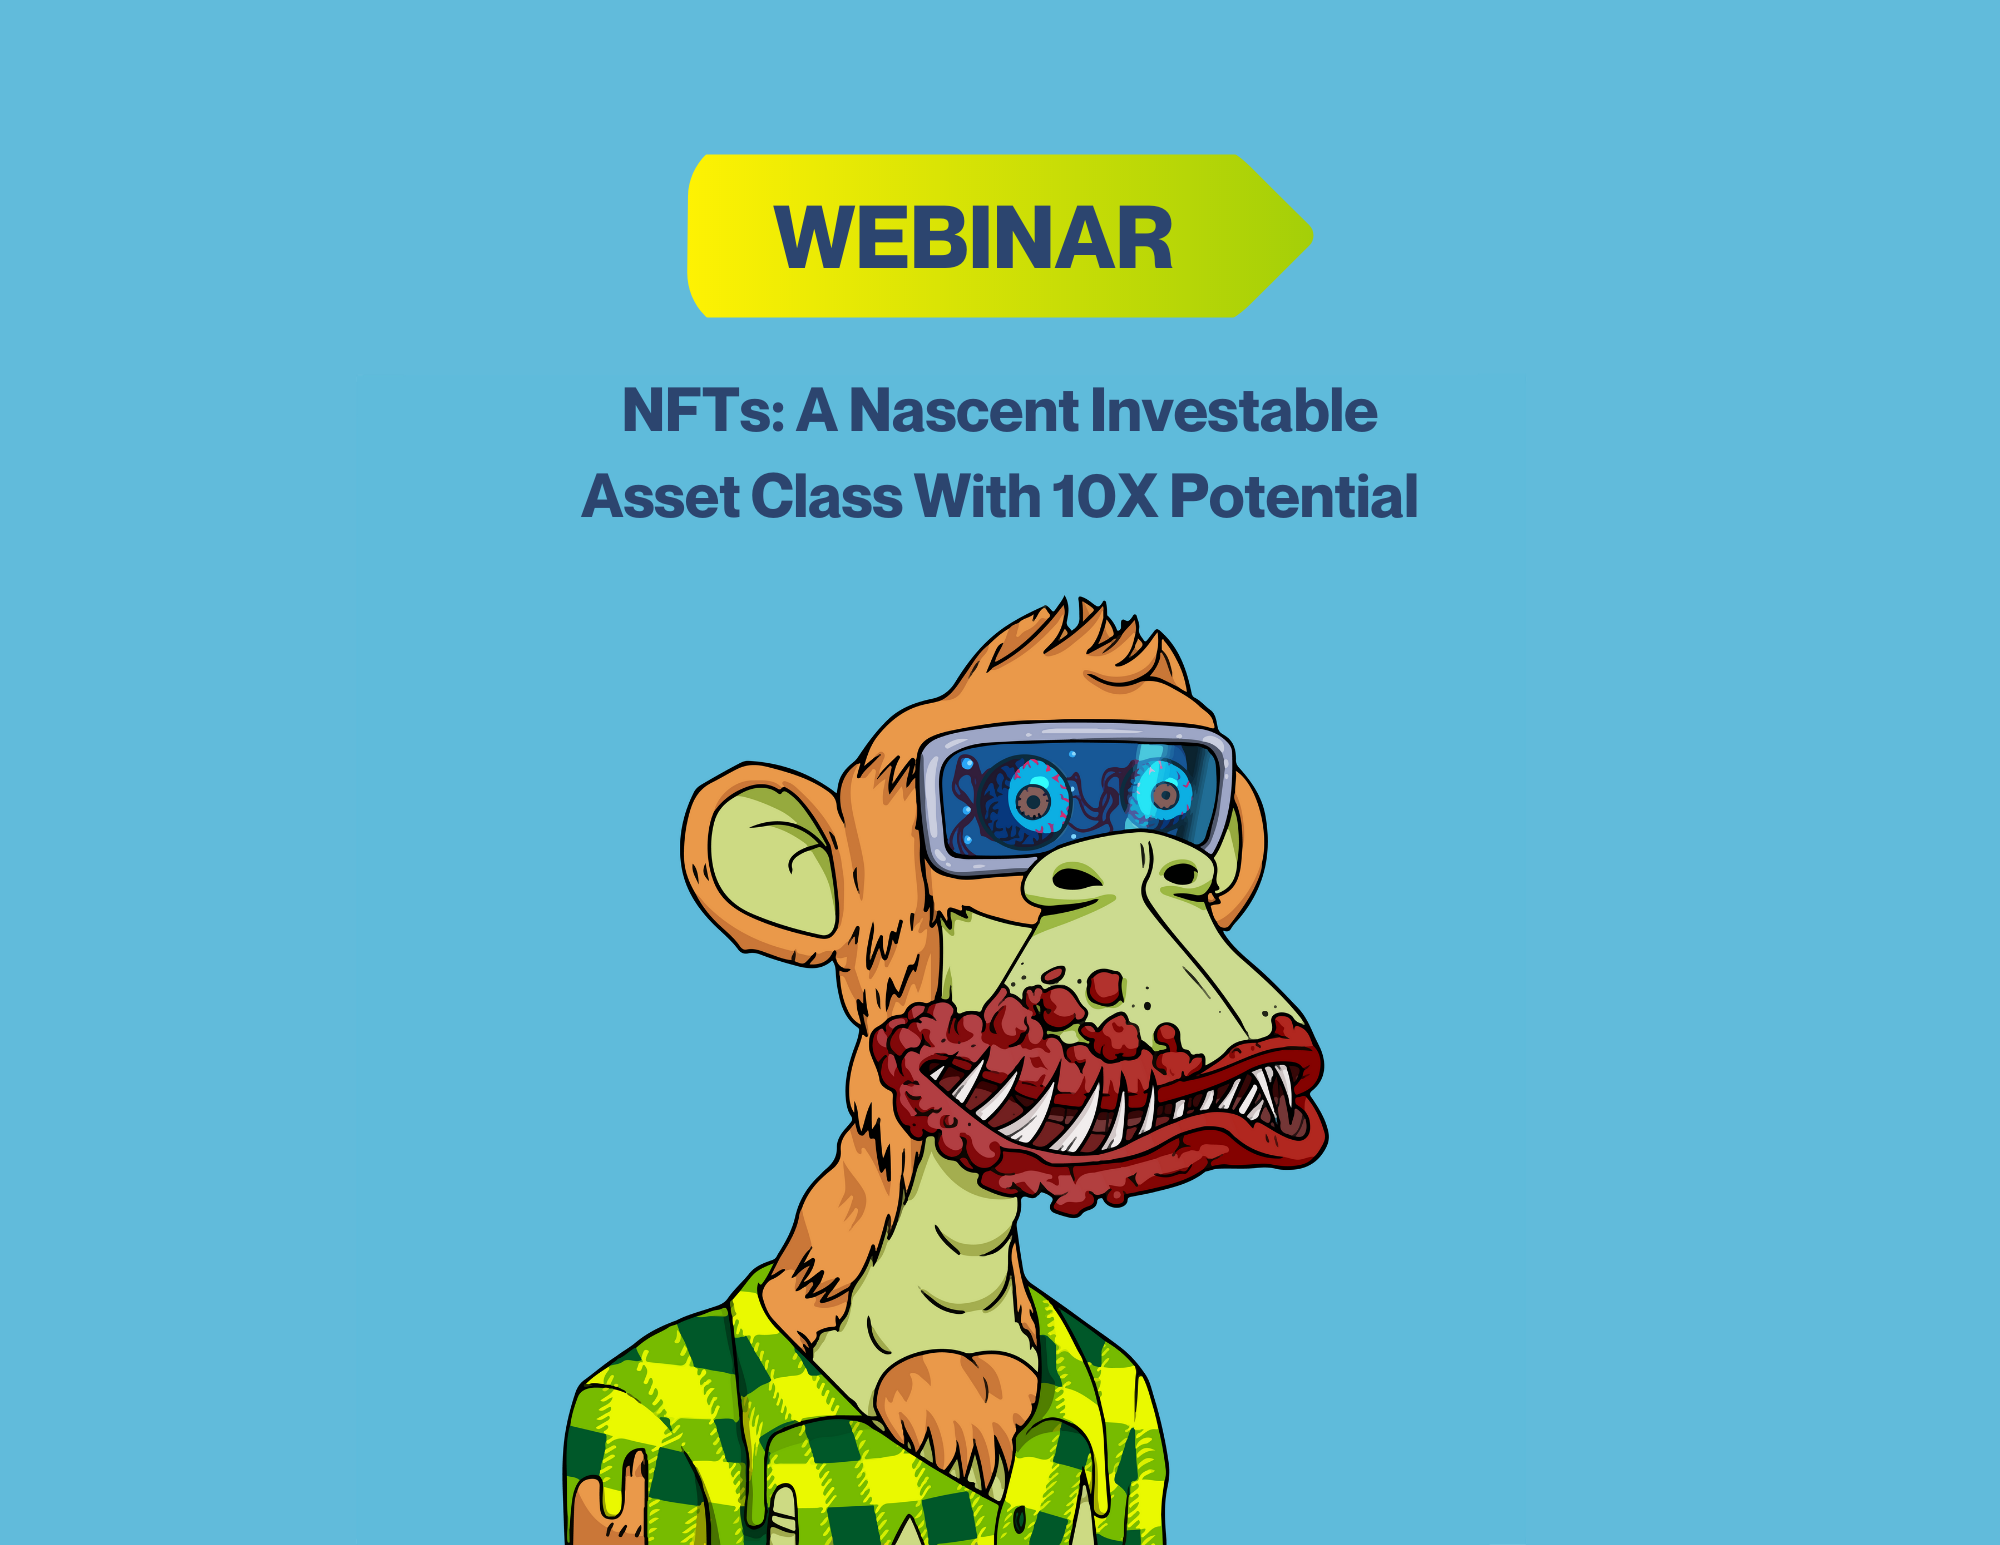 Protected: WEBINAR: NFTs: A Nascent Investable Asset Class With 10X Potential